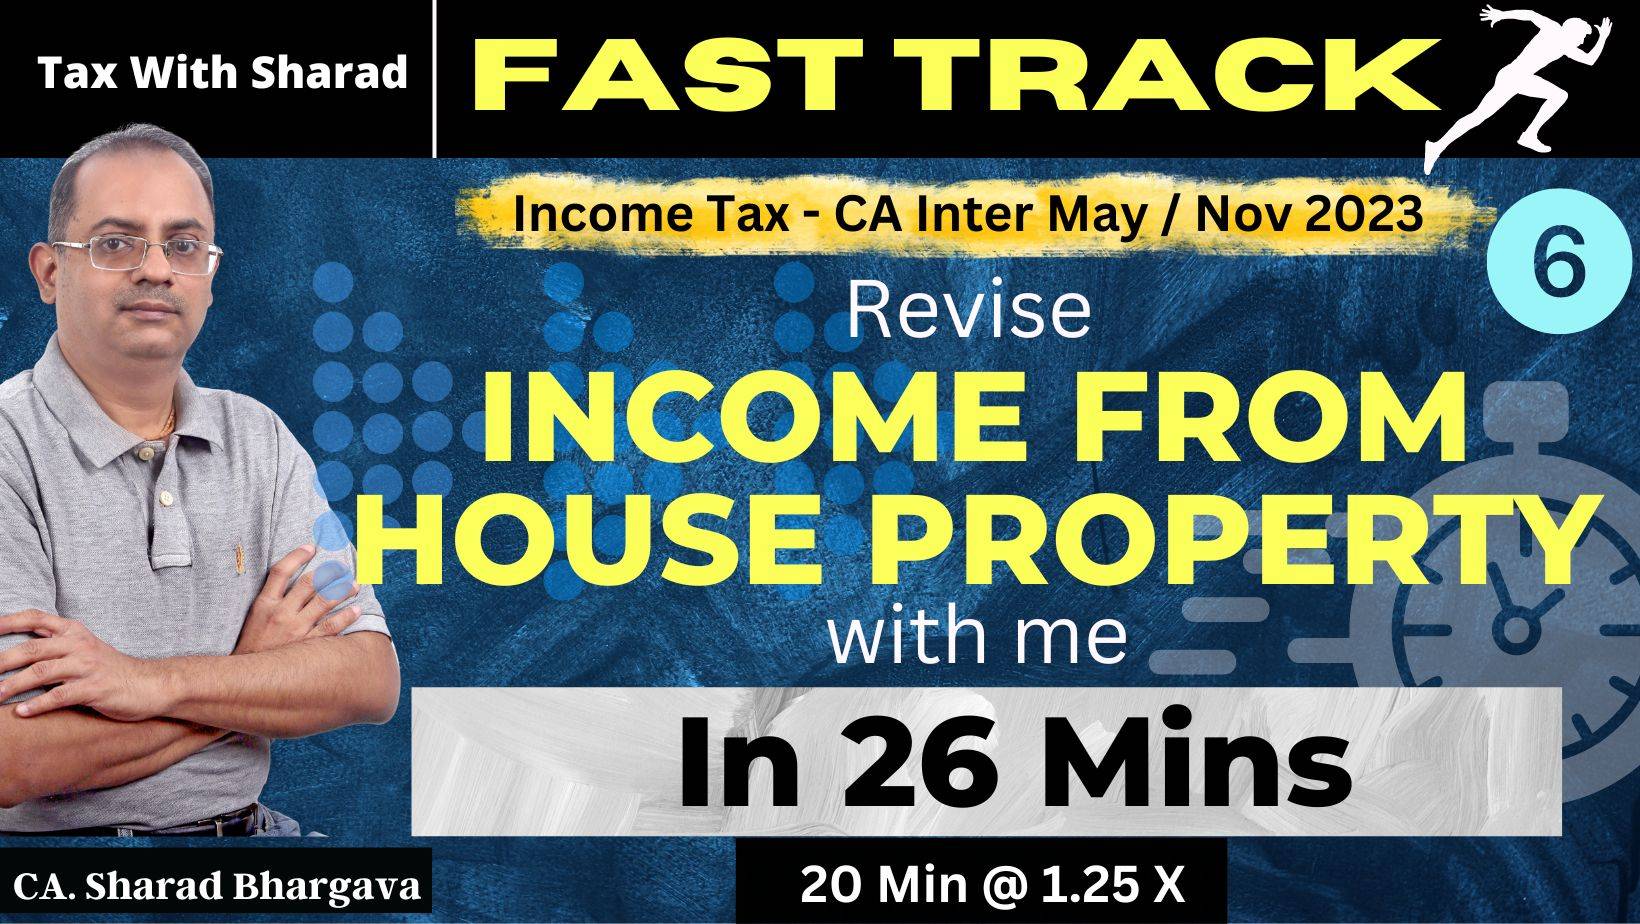 Fast Track Revision (DT) / 6 - Income from House Property / CA Inter 2023 / CA. Sharad Bhargava